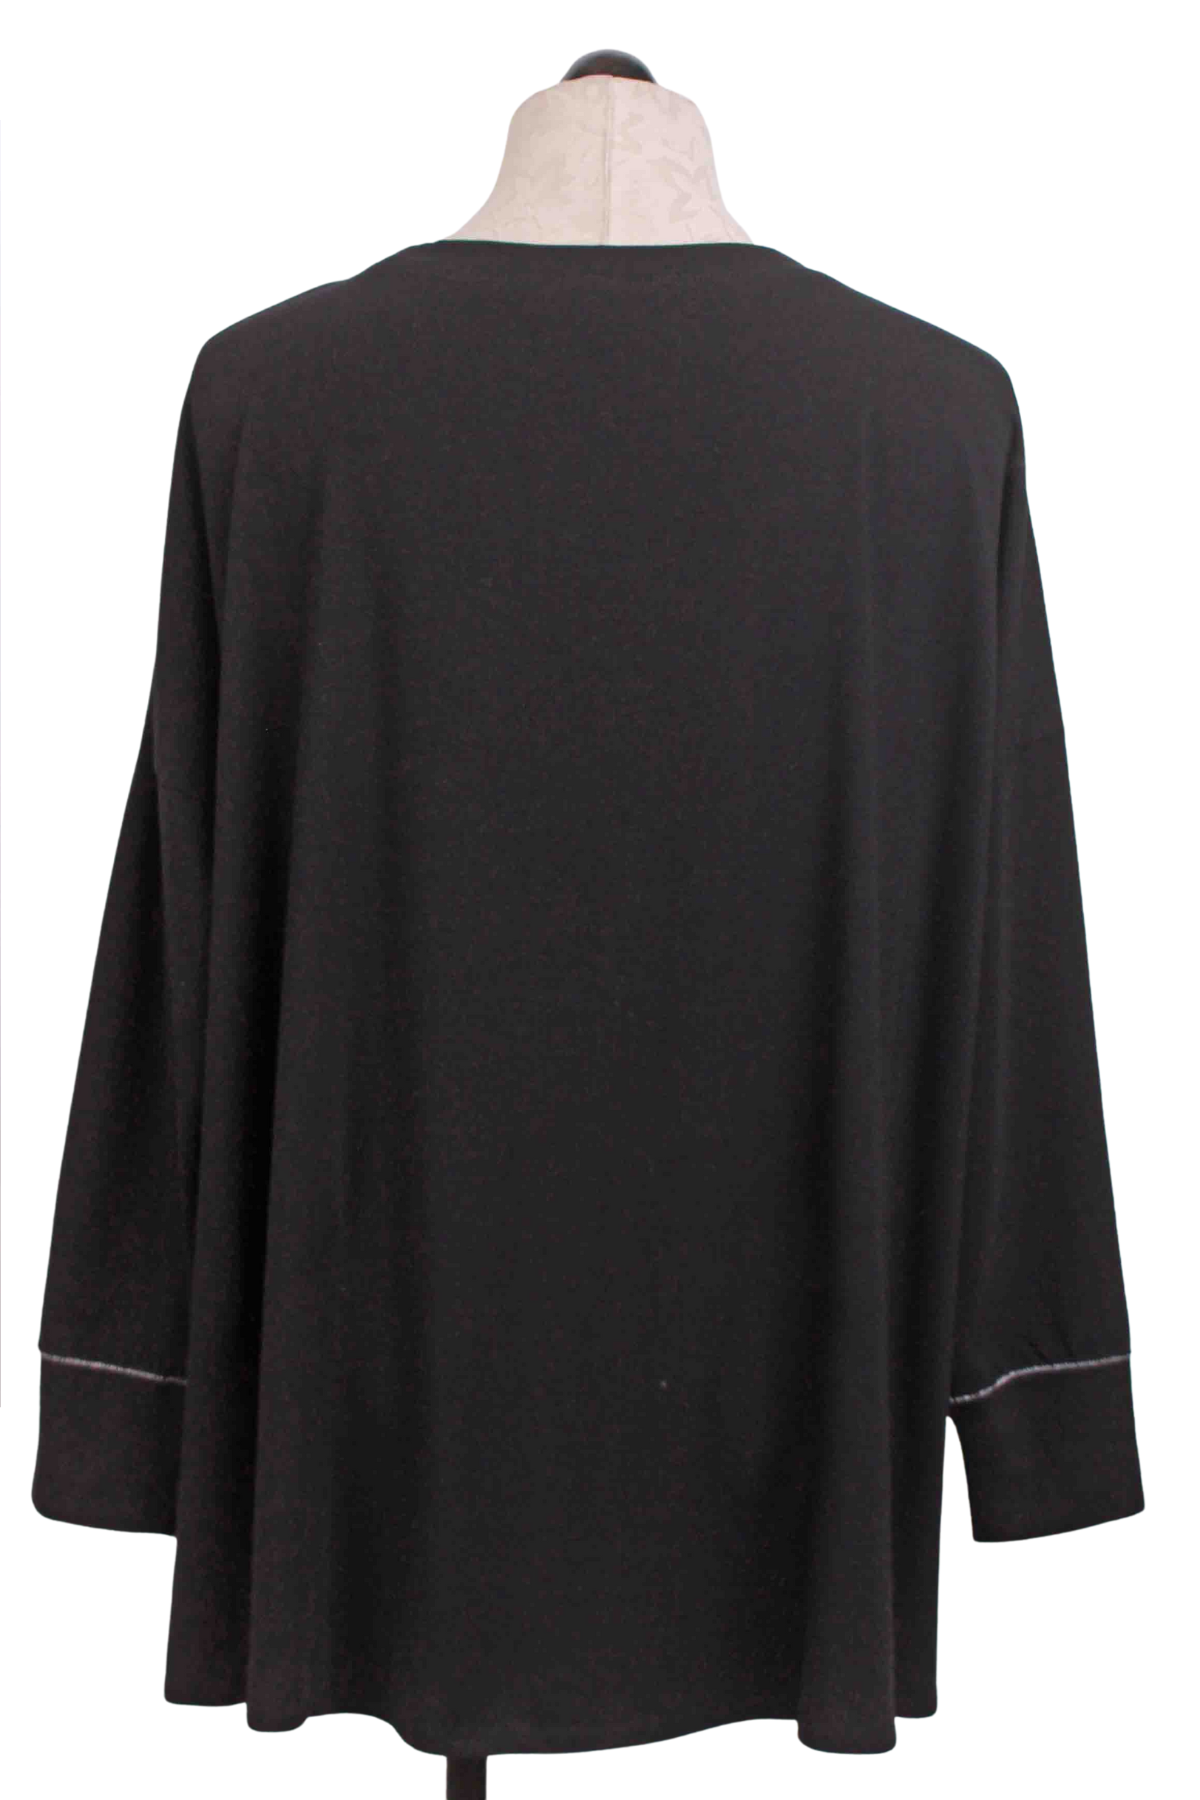 back view of black Front Pleat Swing Tee by Liv by Habitat